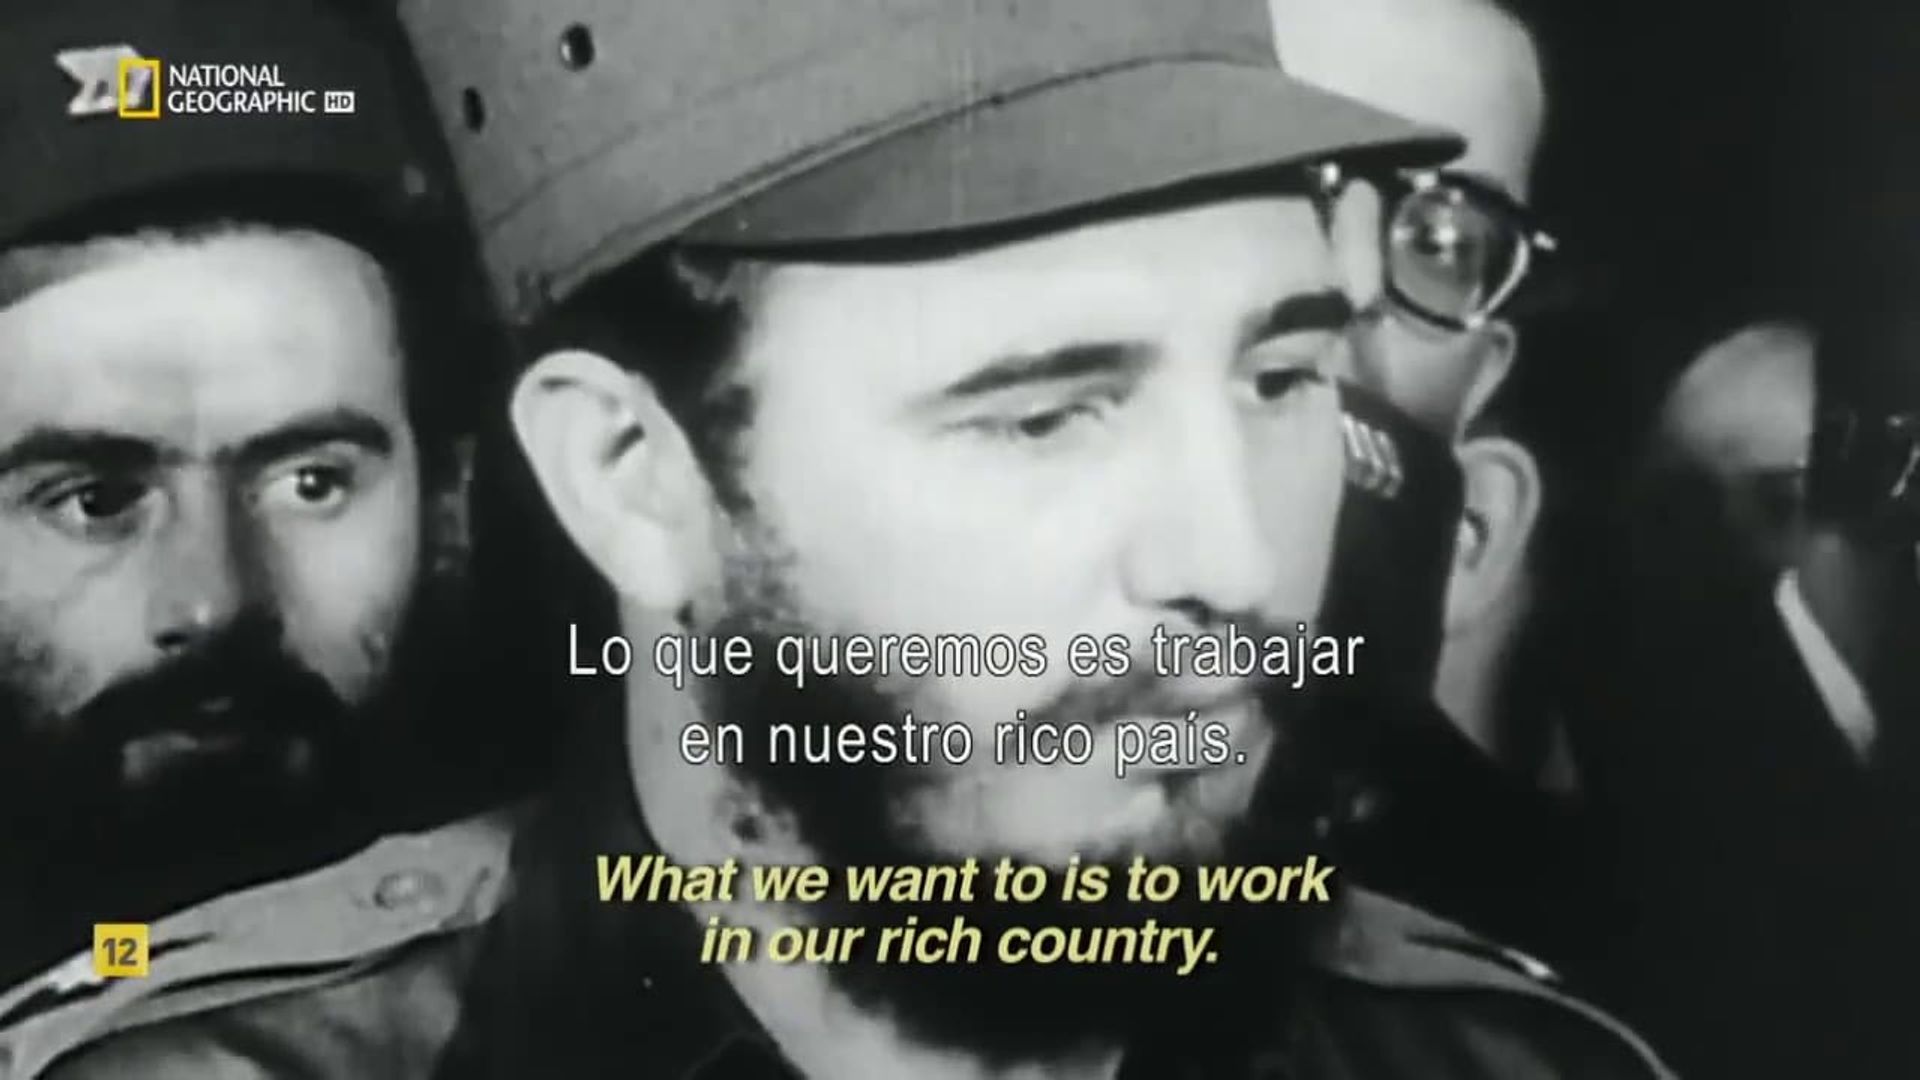 The Fidel Castro Tapes background